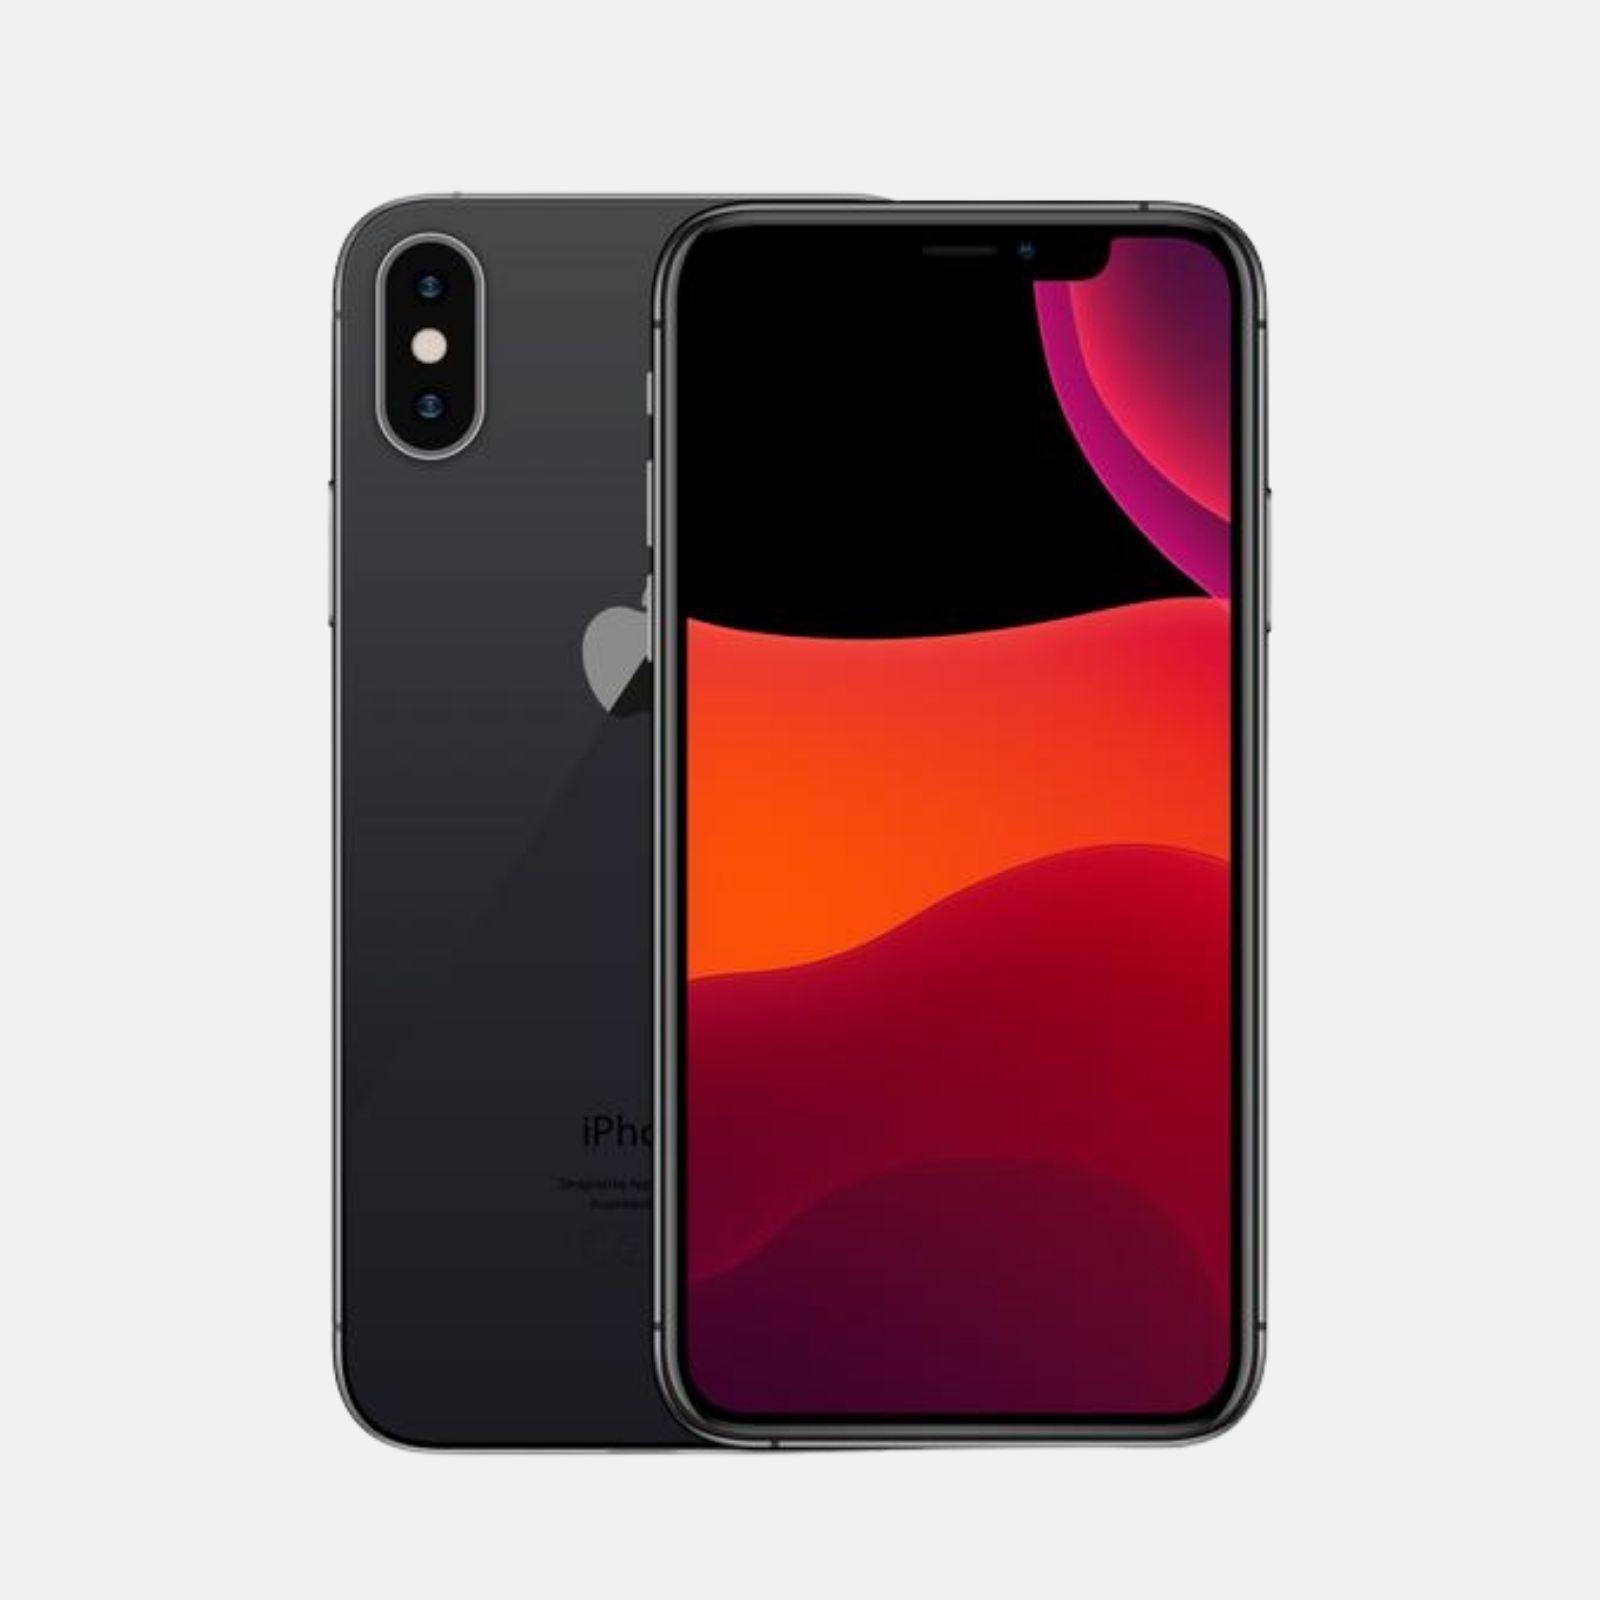 iphone xs max - Cell phones & accessories